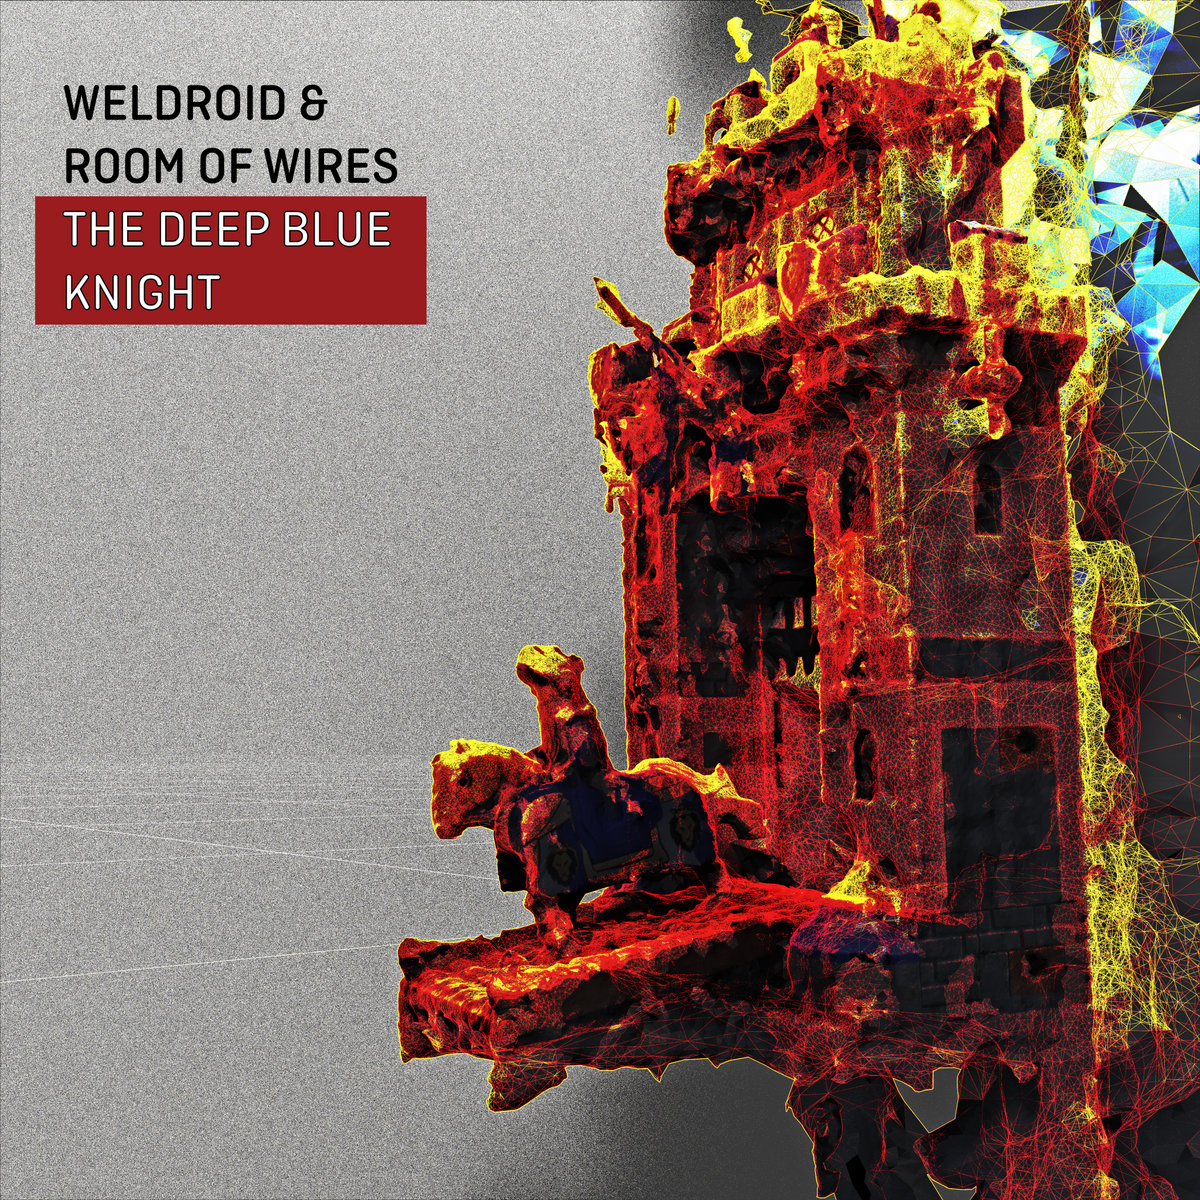 Our collaboration with Weldroid 'The Deep Blue Knight” is out now on S27